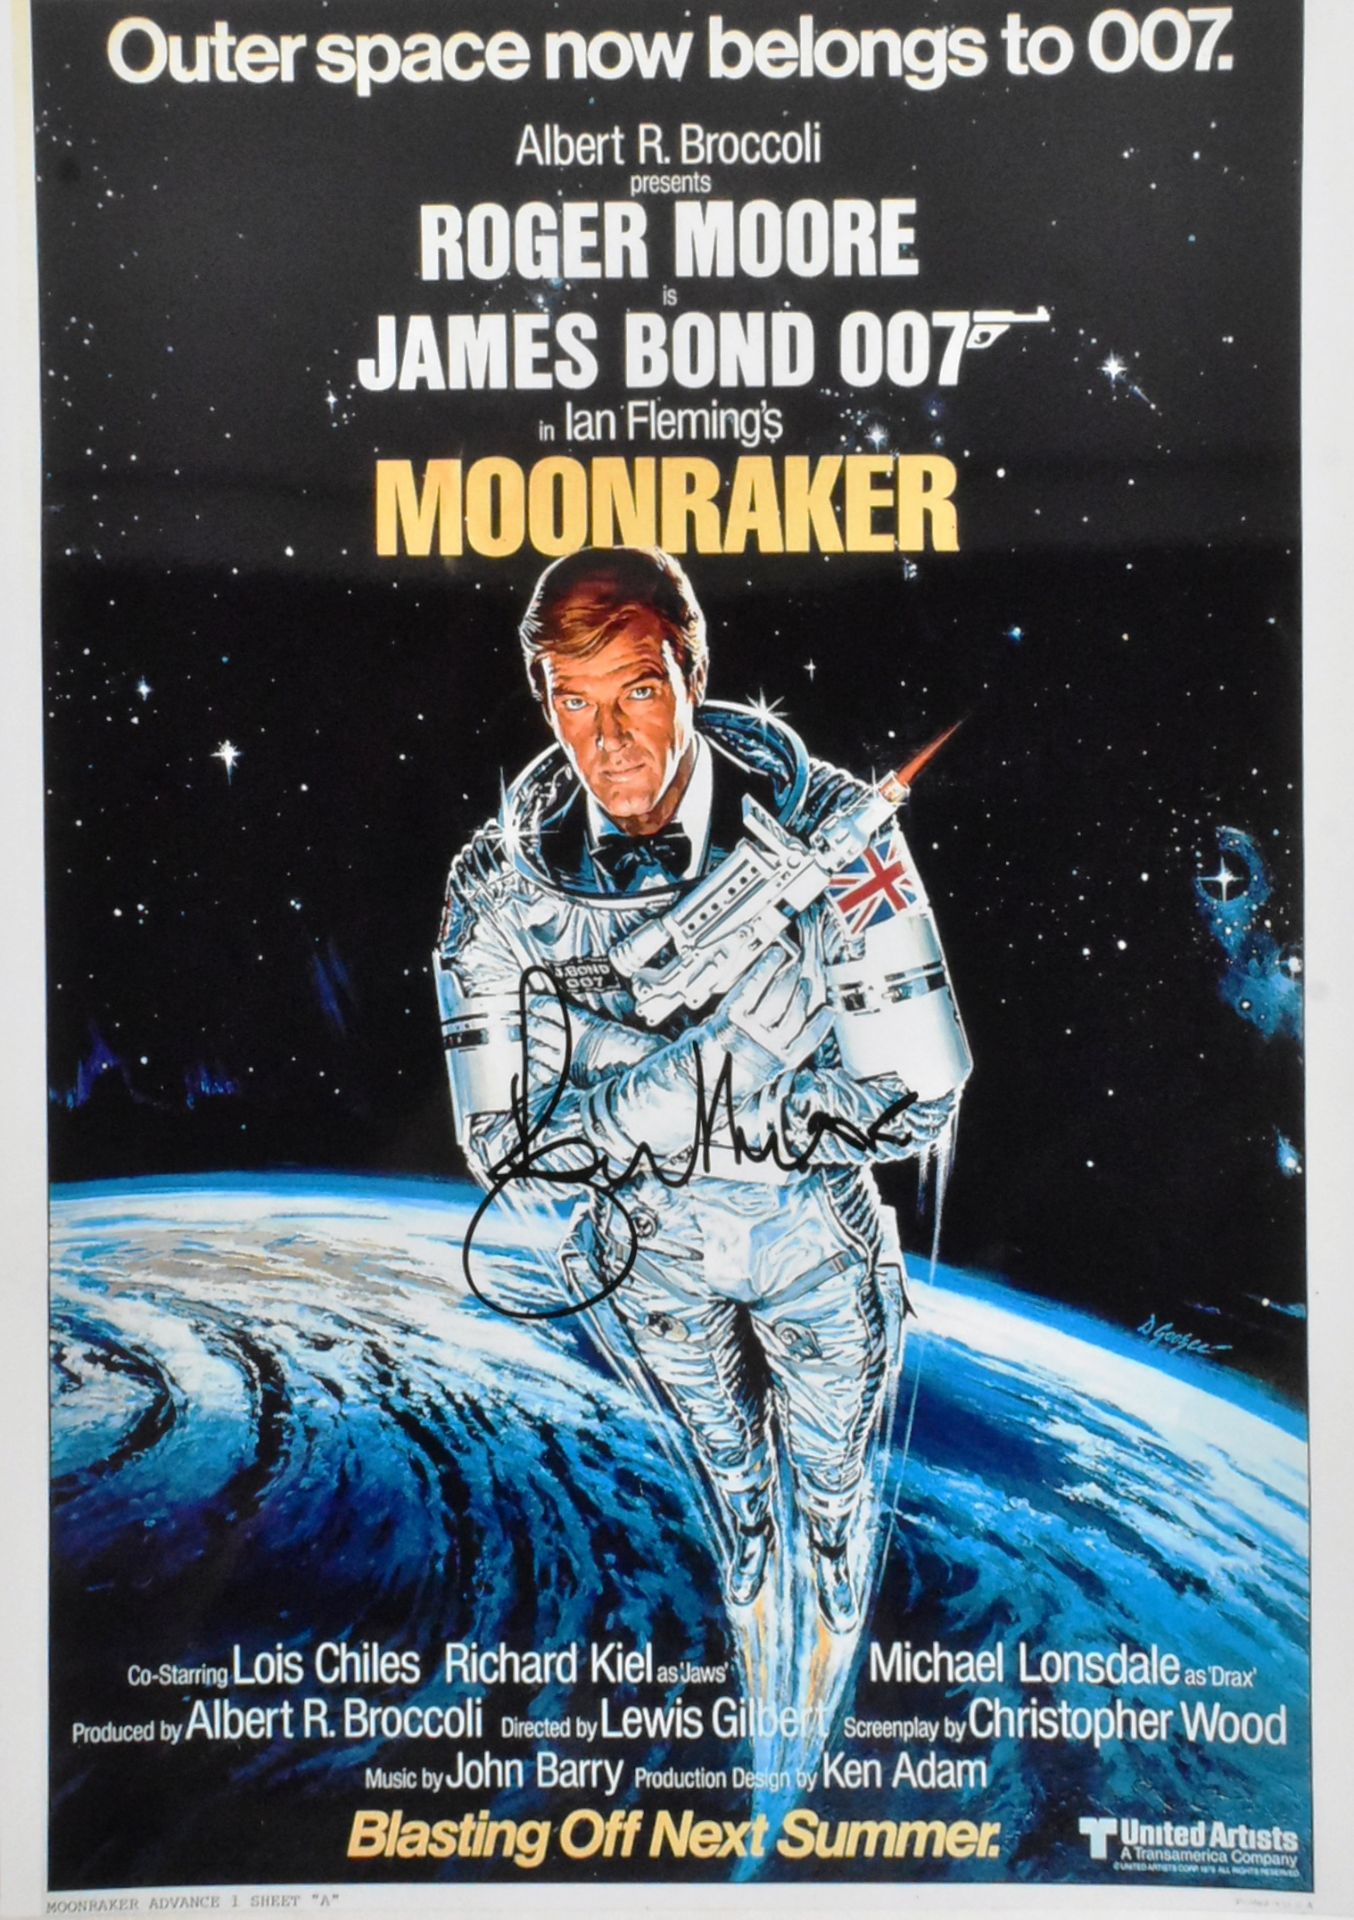 SIR ROGER MOORE - JAMES BOND 007 - SIGNED 16X12" POSTER